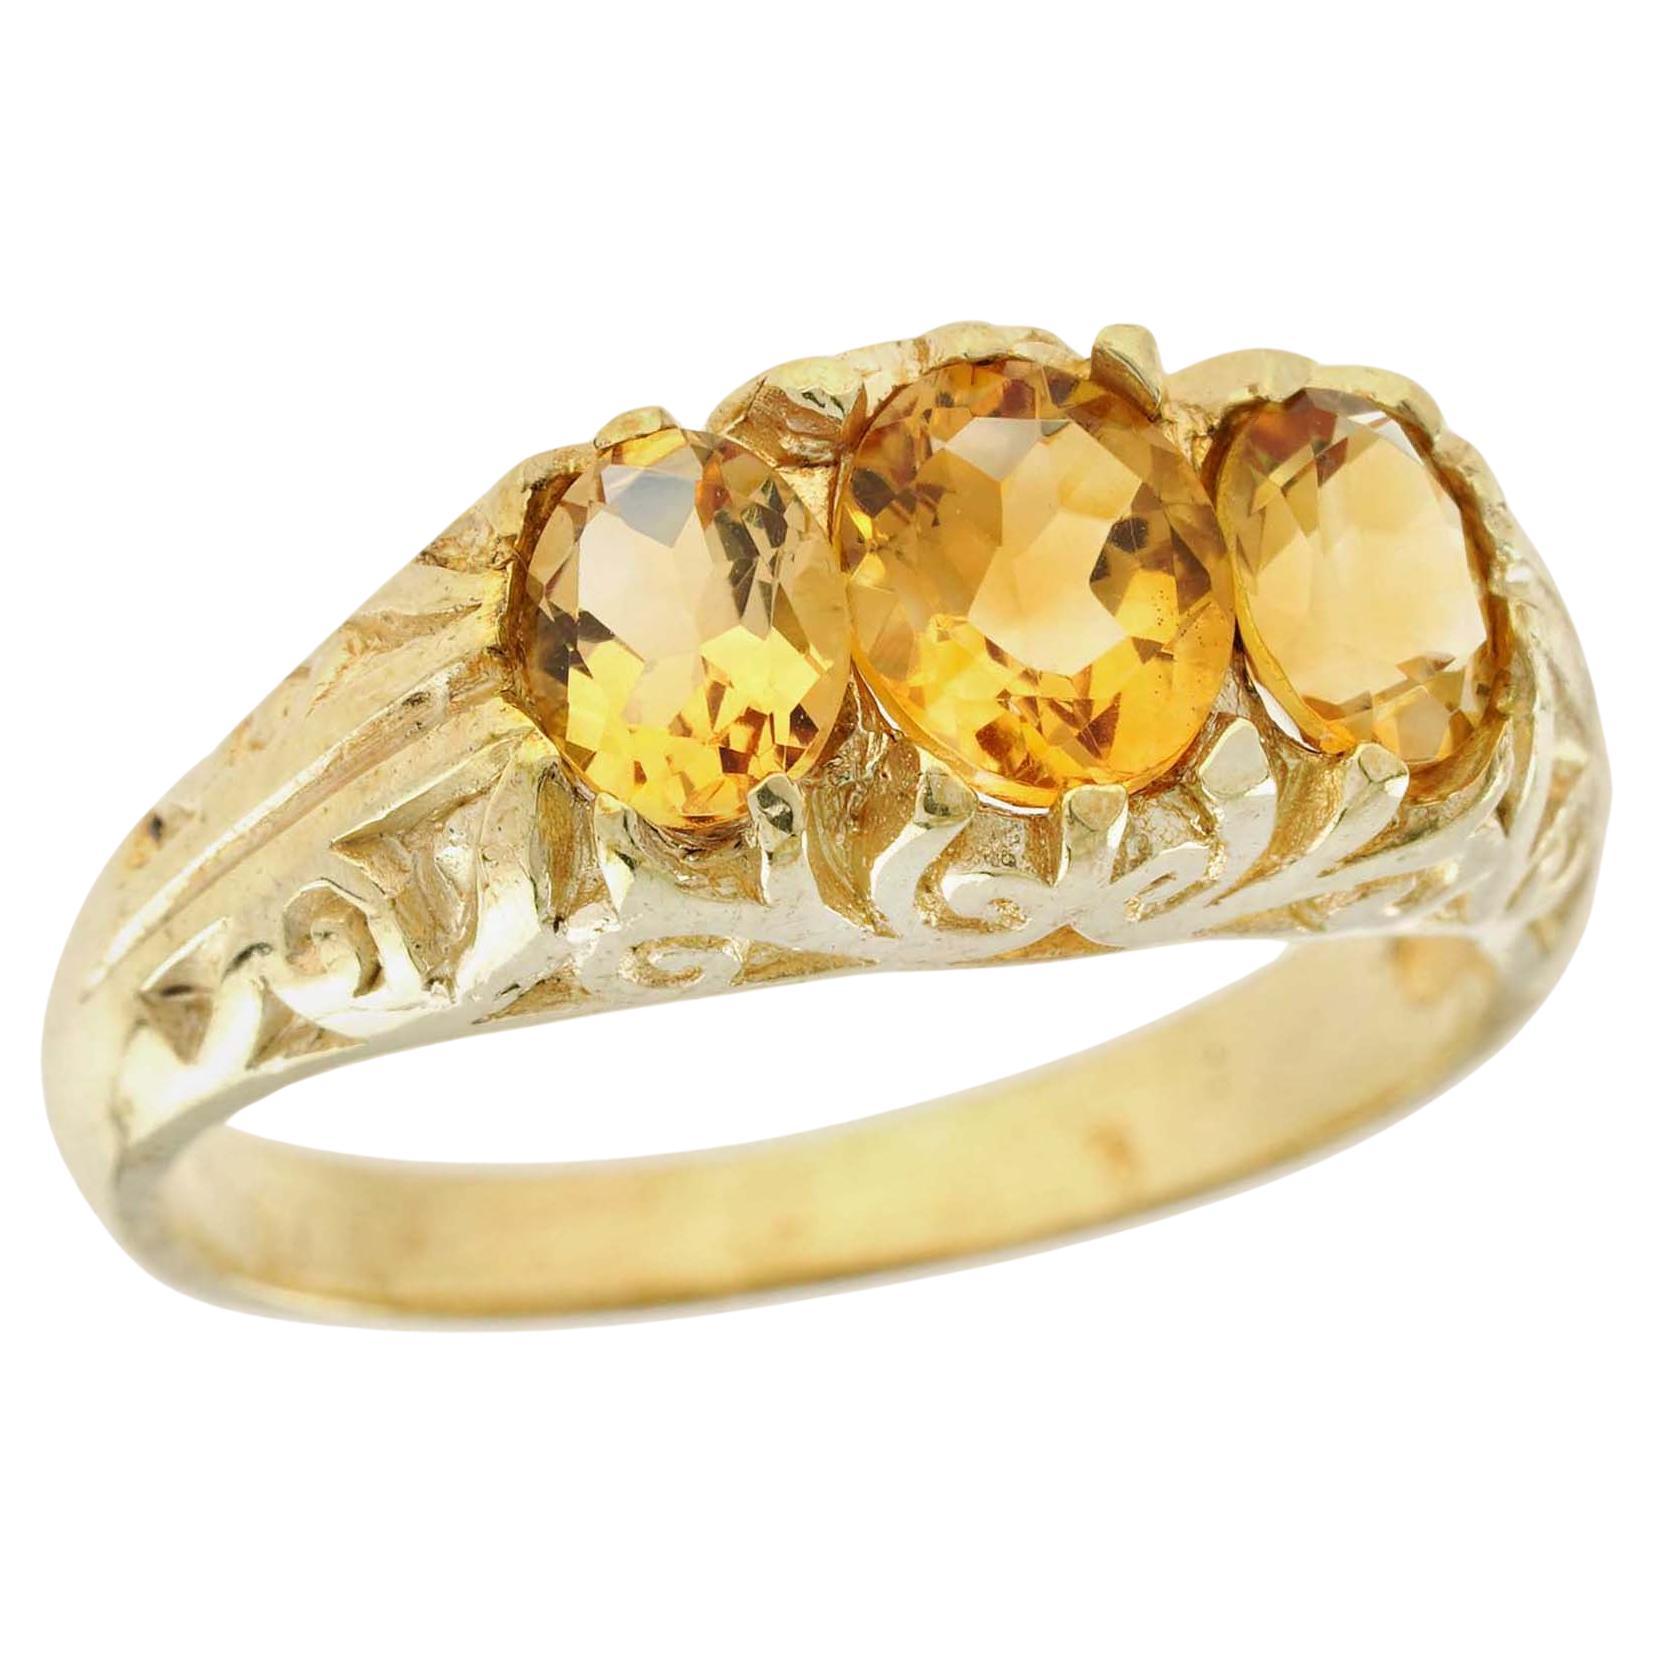 Natural Oval Citrine Vintage Style Three Stone Ring in Solid 9K Yellow Gold